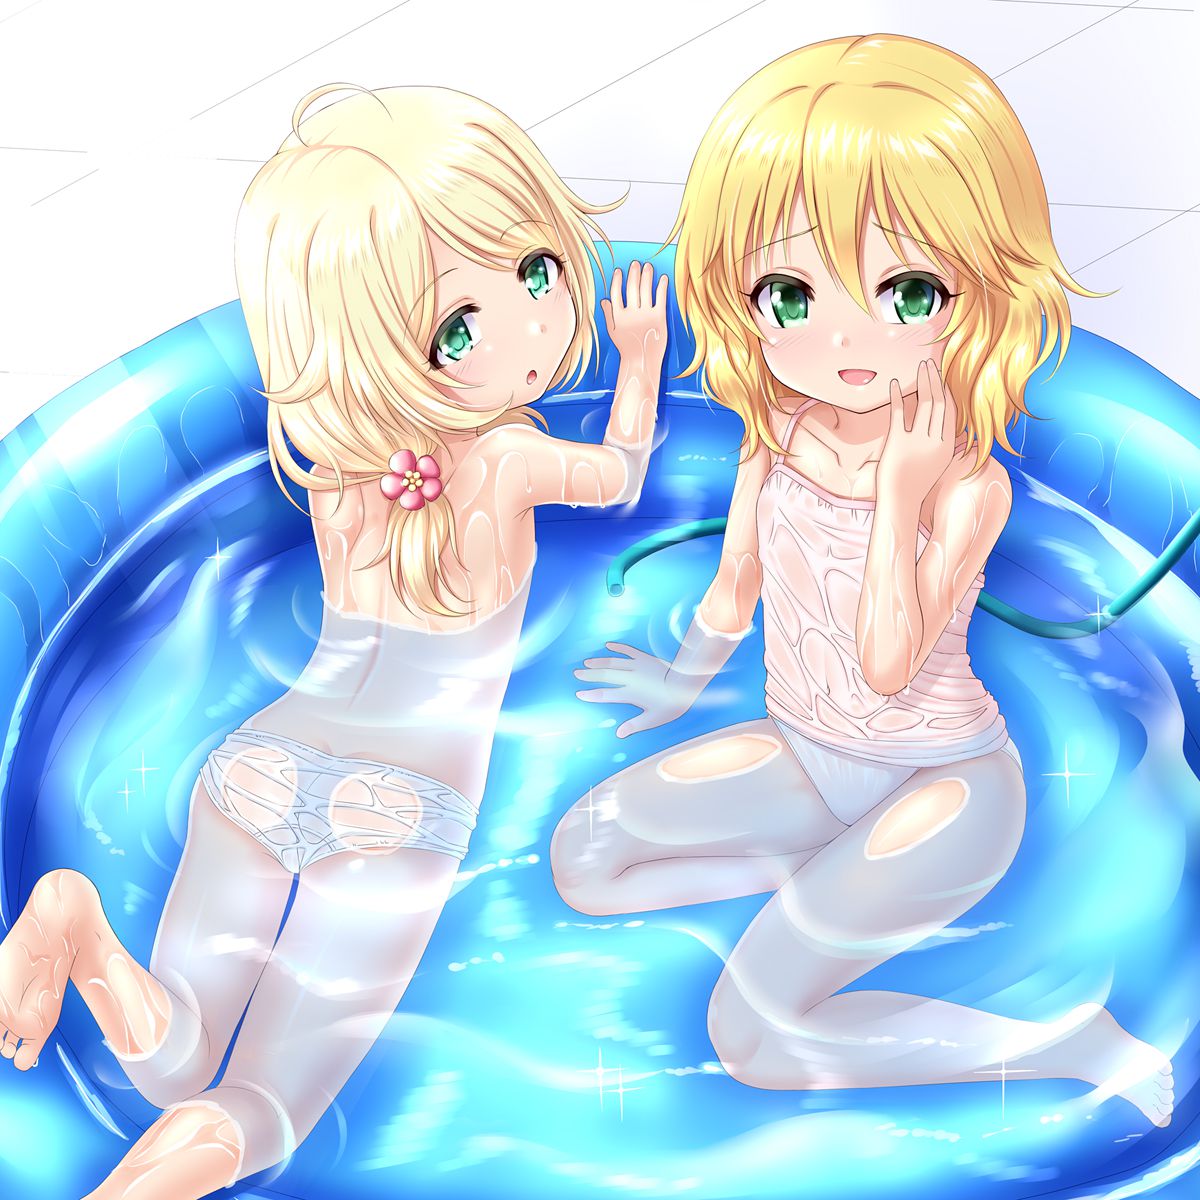 Erotic anime summary Erotic image collection of wet transparent beauties and beautiful girls that are transparent variously [50 sheets] 30